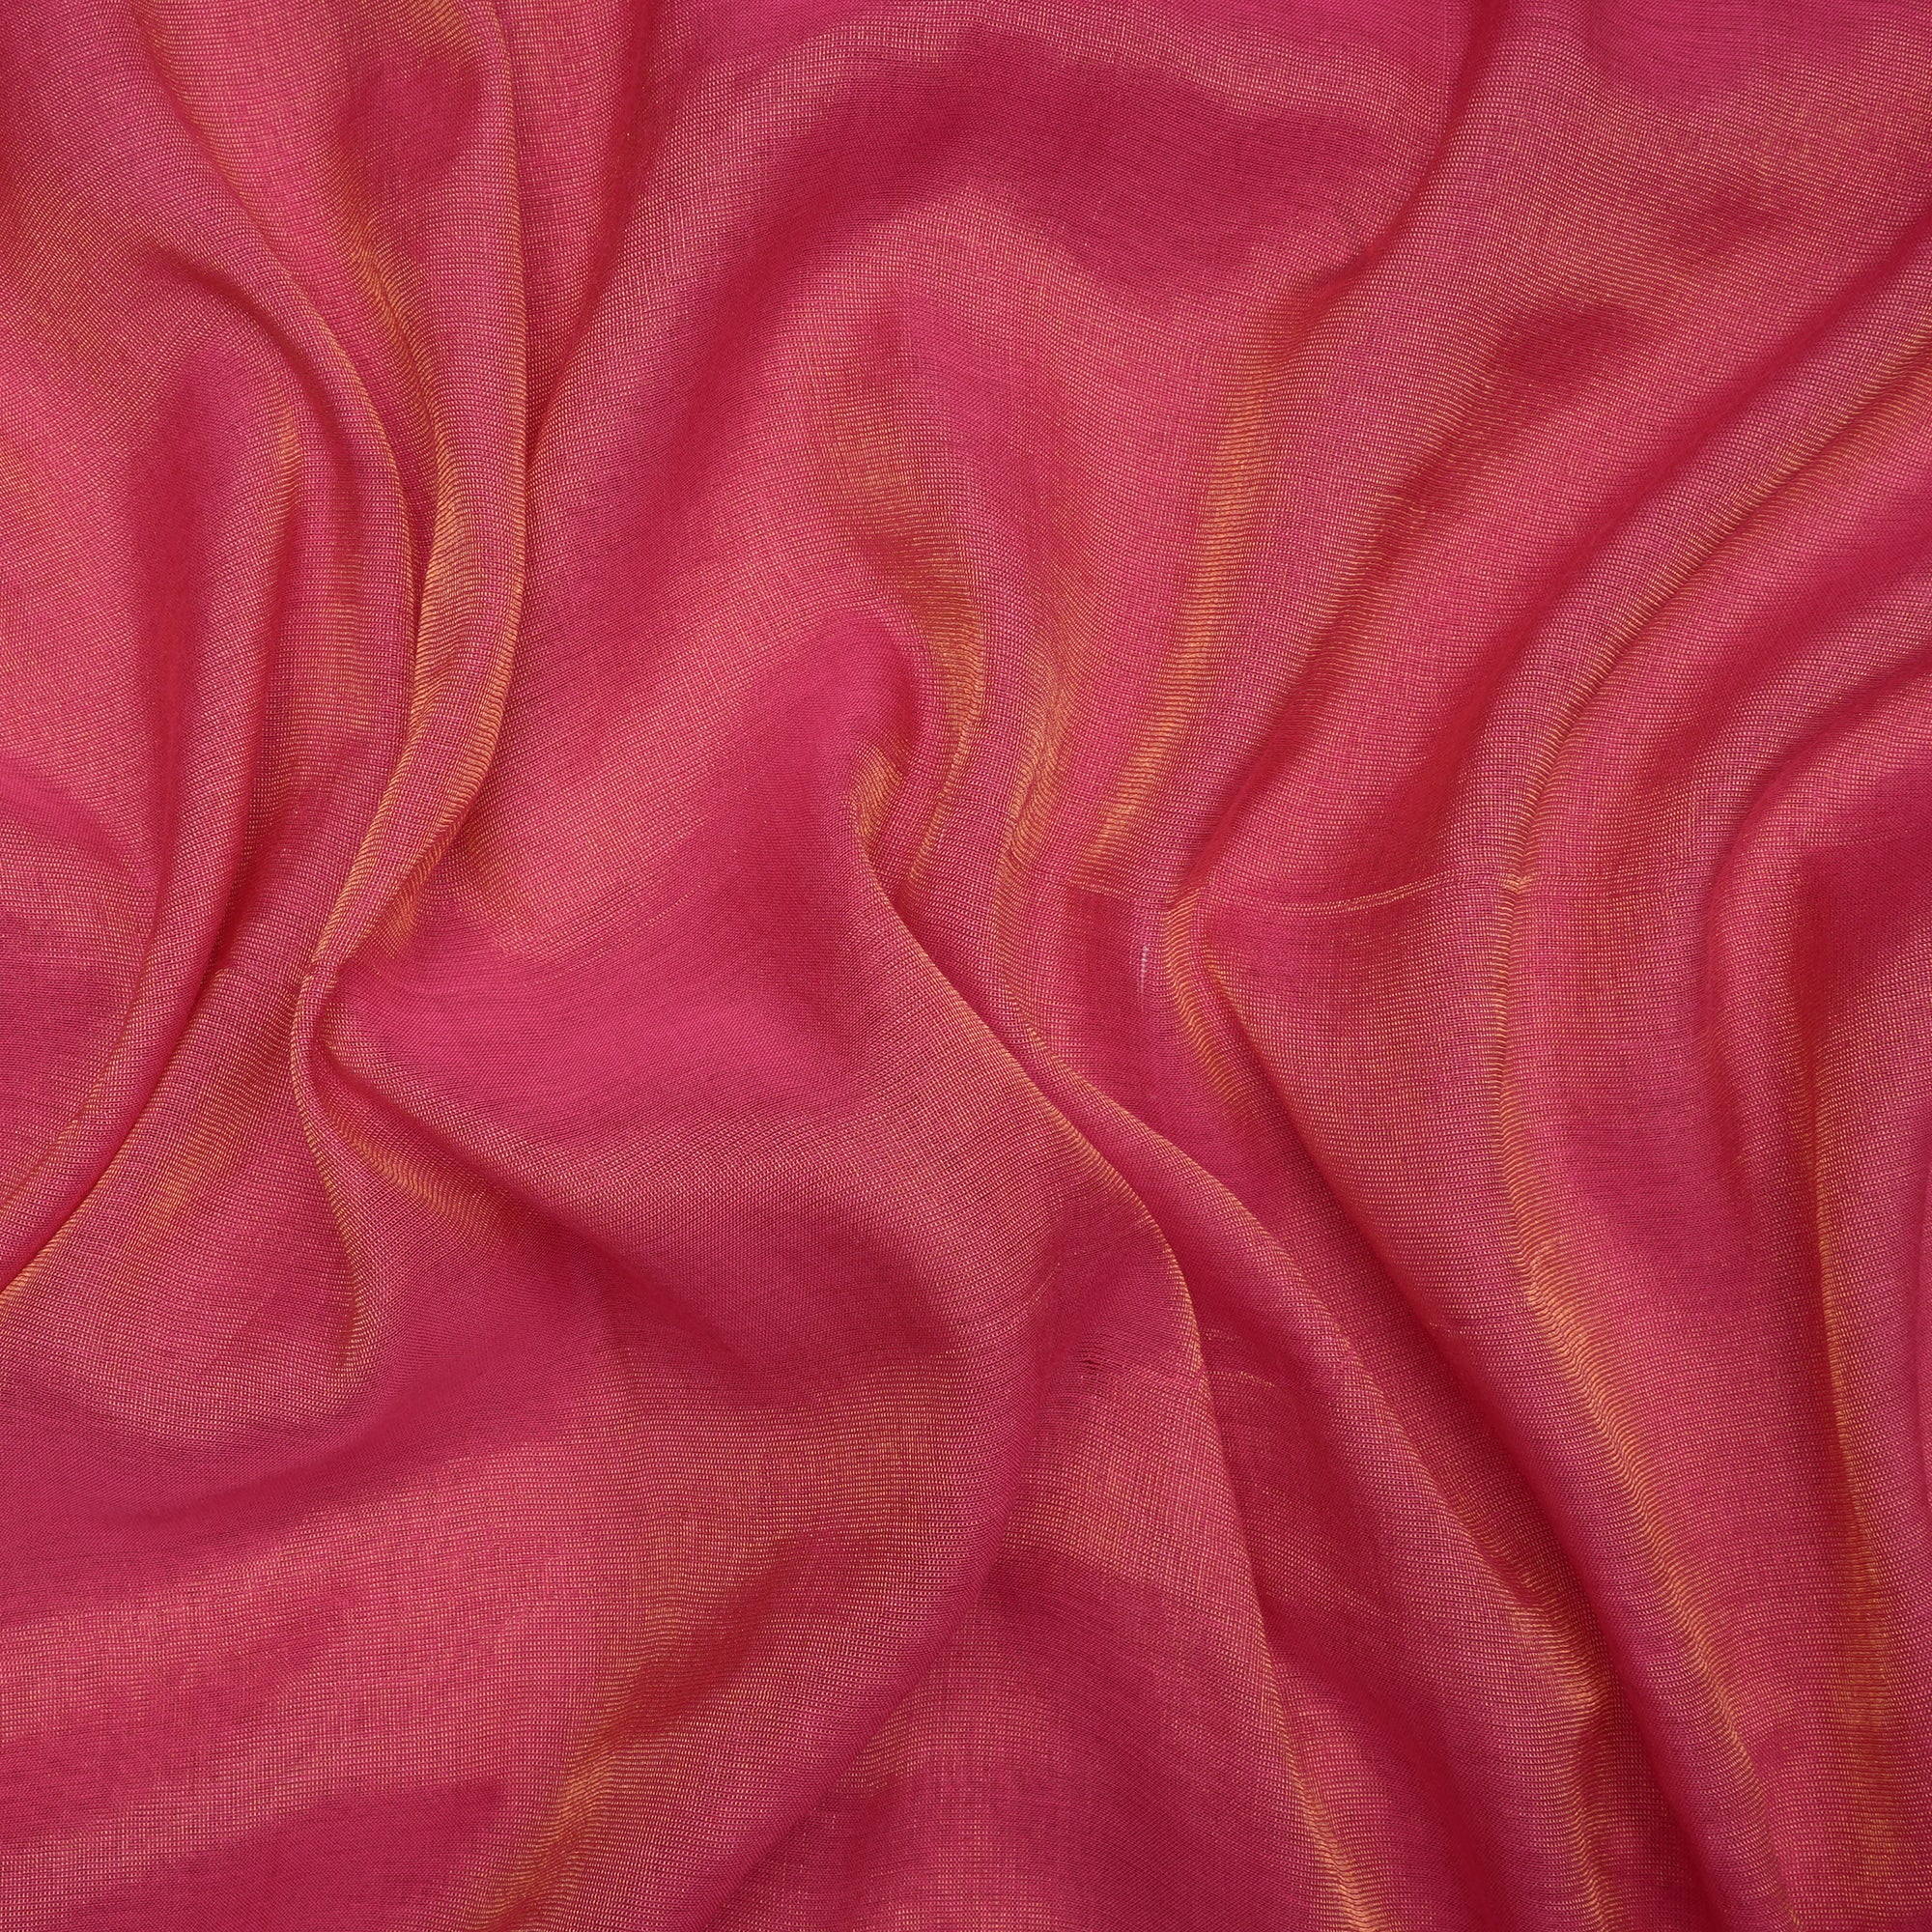 Rani Pink-Gold Piece Dyed Pure Tissue Chanderi Fabric